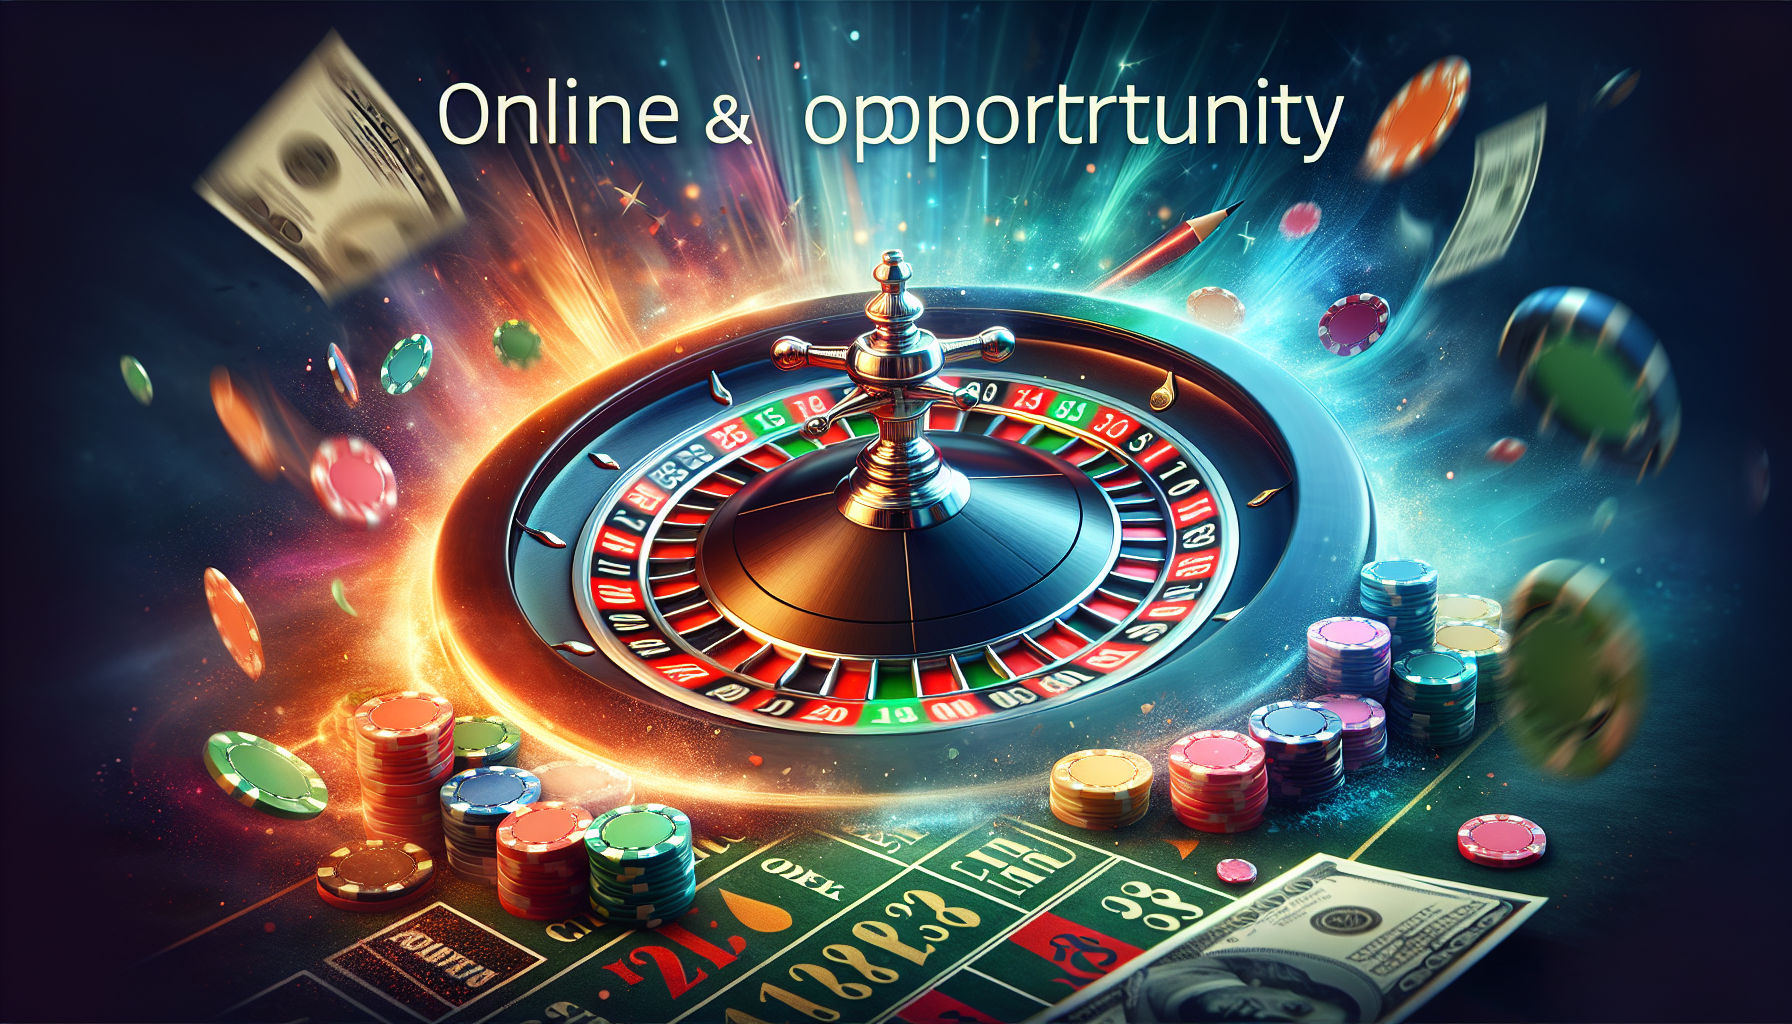 Can You Win Big Money On Online Casino?